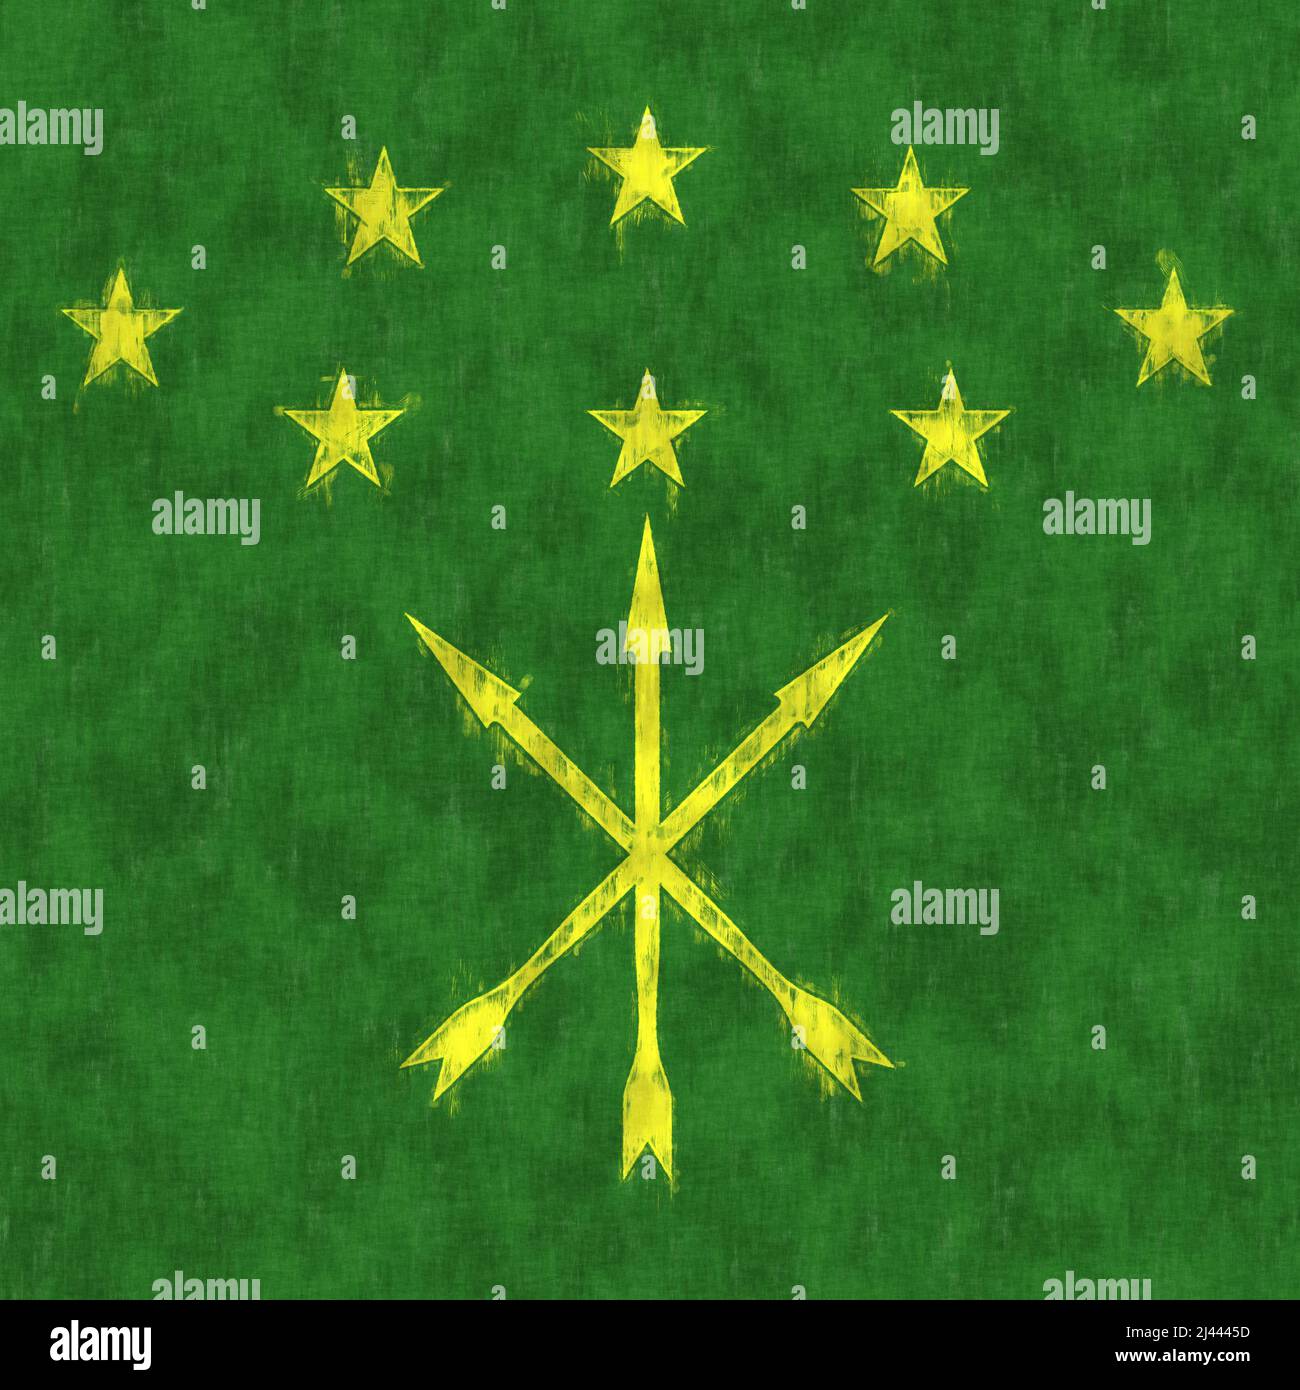 Adyghe oil painting. Adygea emblem drawing canvas. A painted picture of a country's flag. Stock Photo